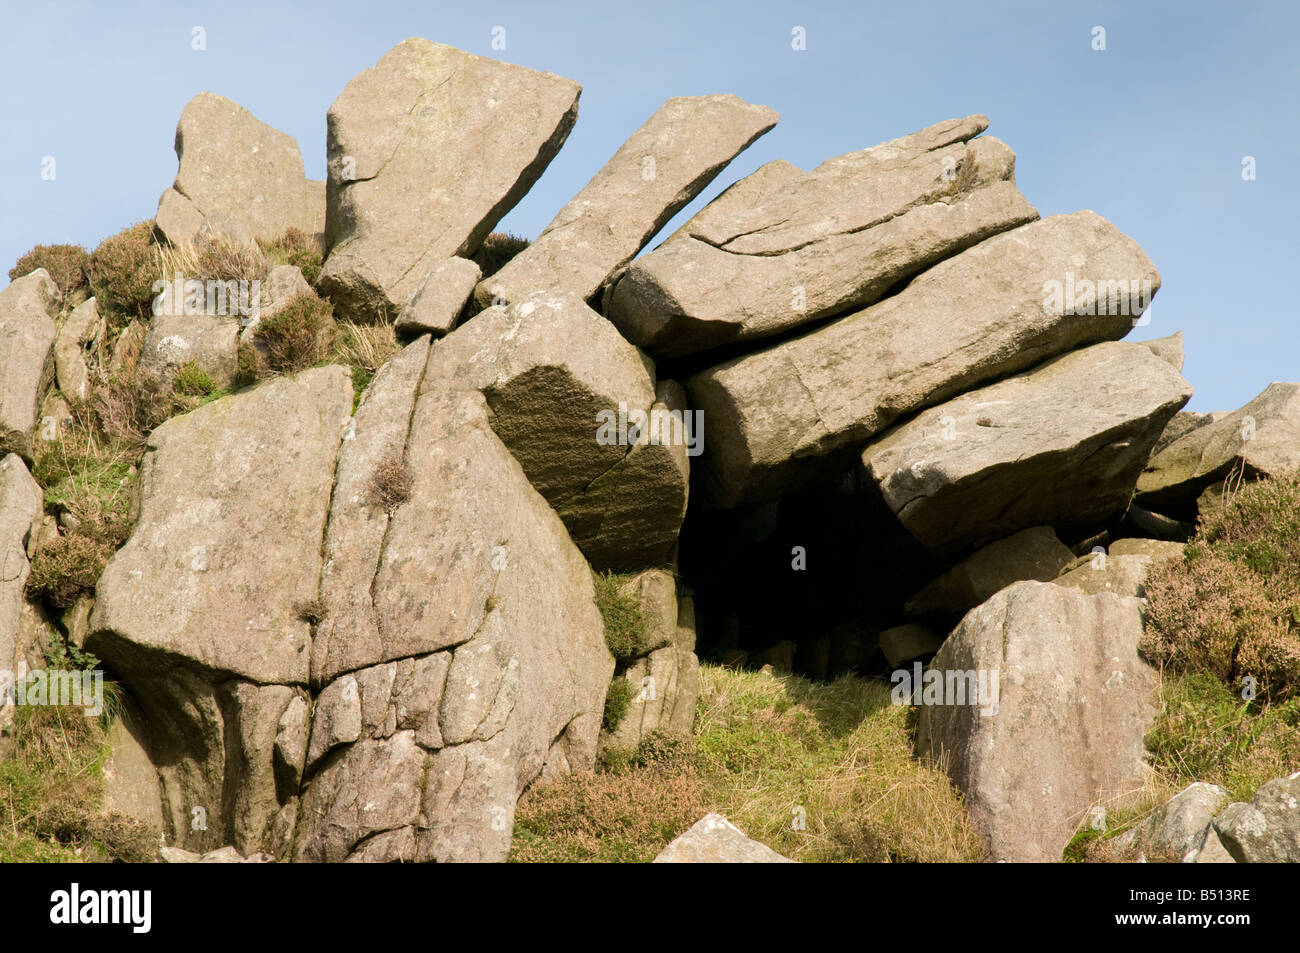 Carn Menyn Carn Meini rocky dolerite outcrop Pembrokeshire south west wales the source of the 82 bluestones for Stonehenge Stock Photo